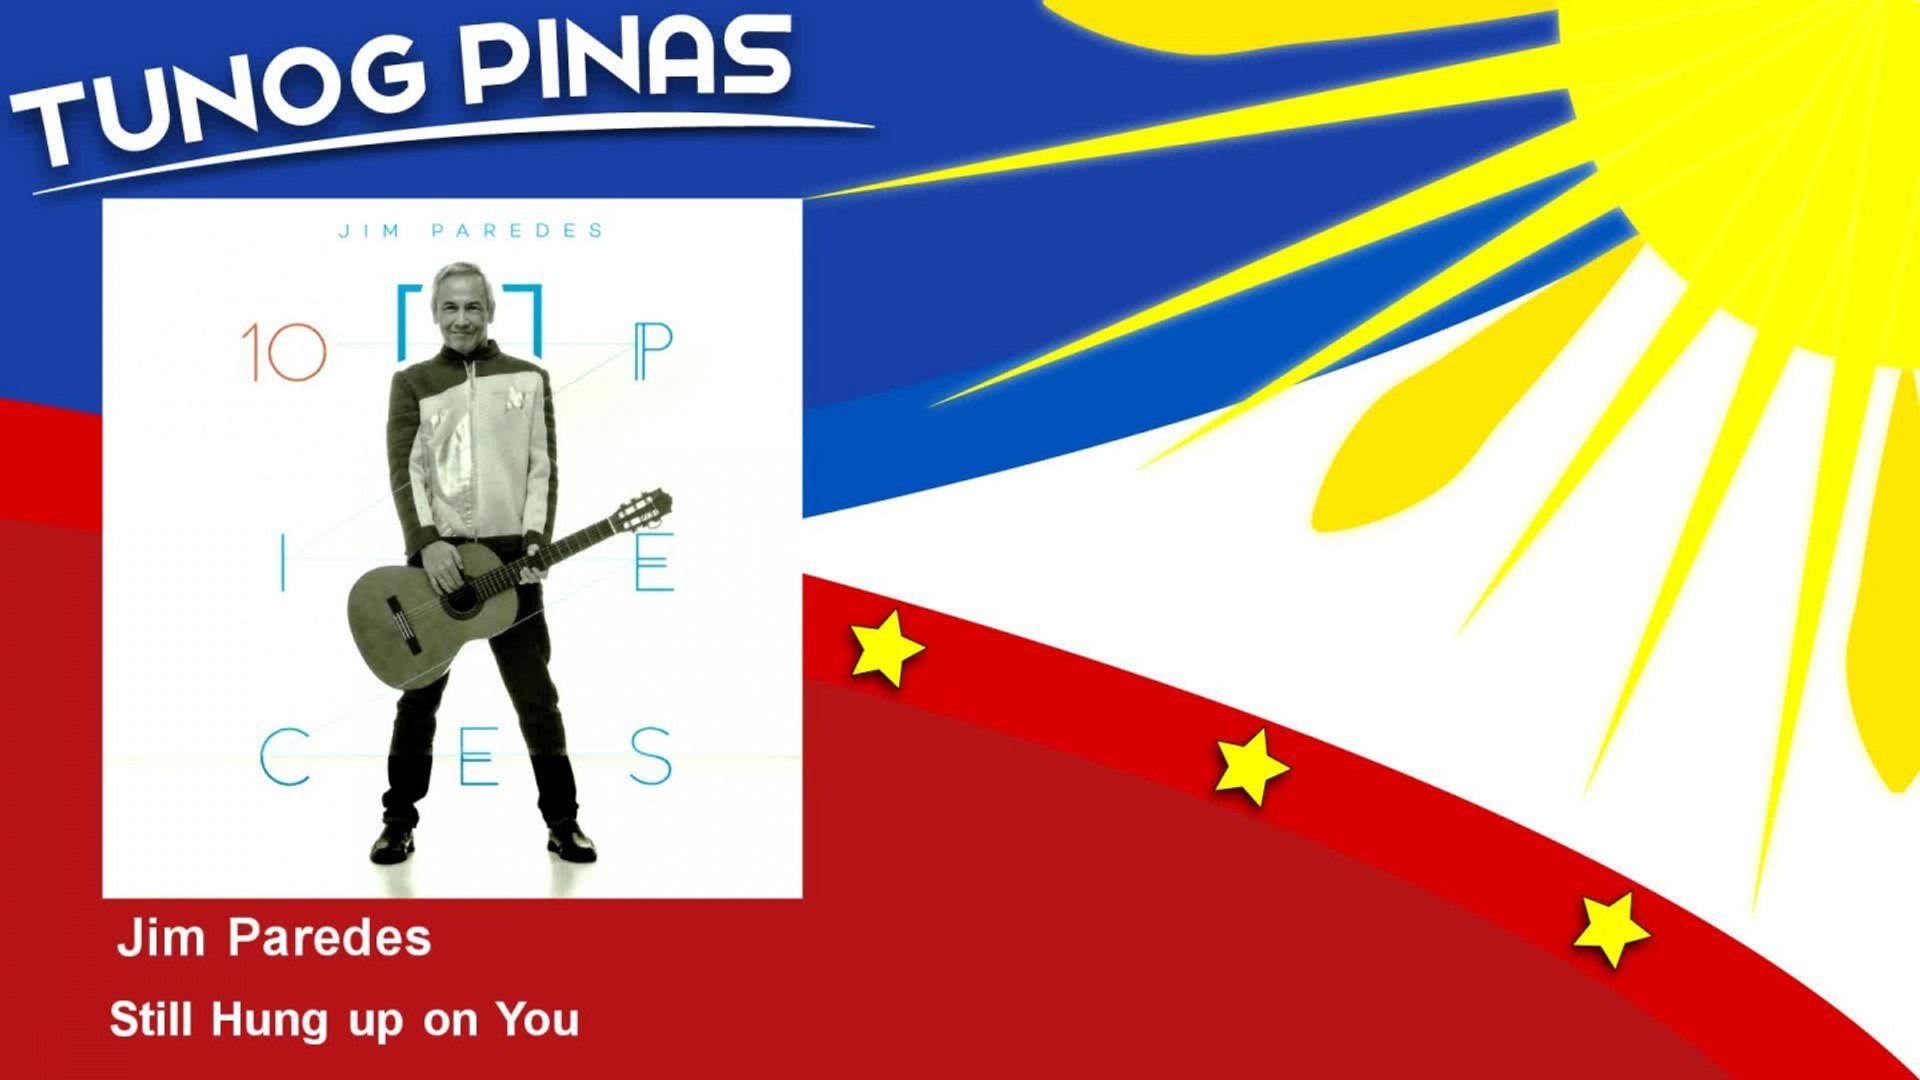 Jim Paredes - Still Hung up on You